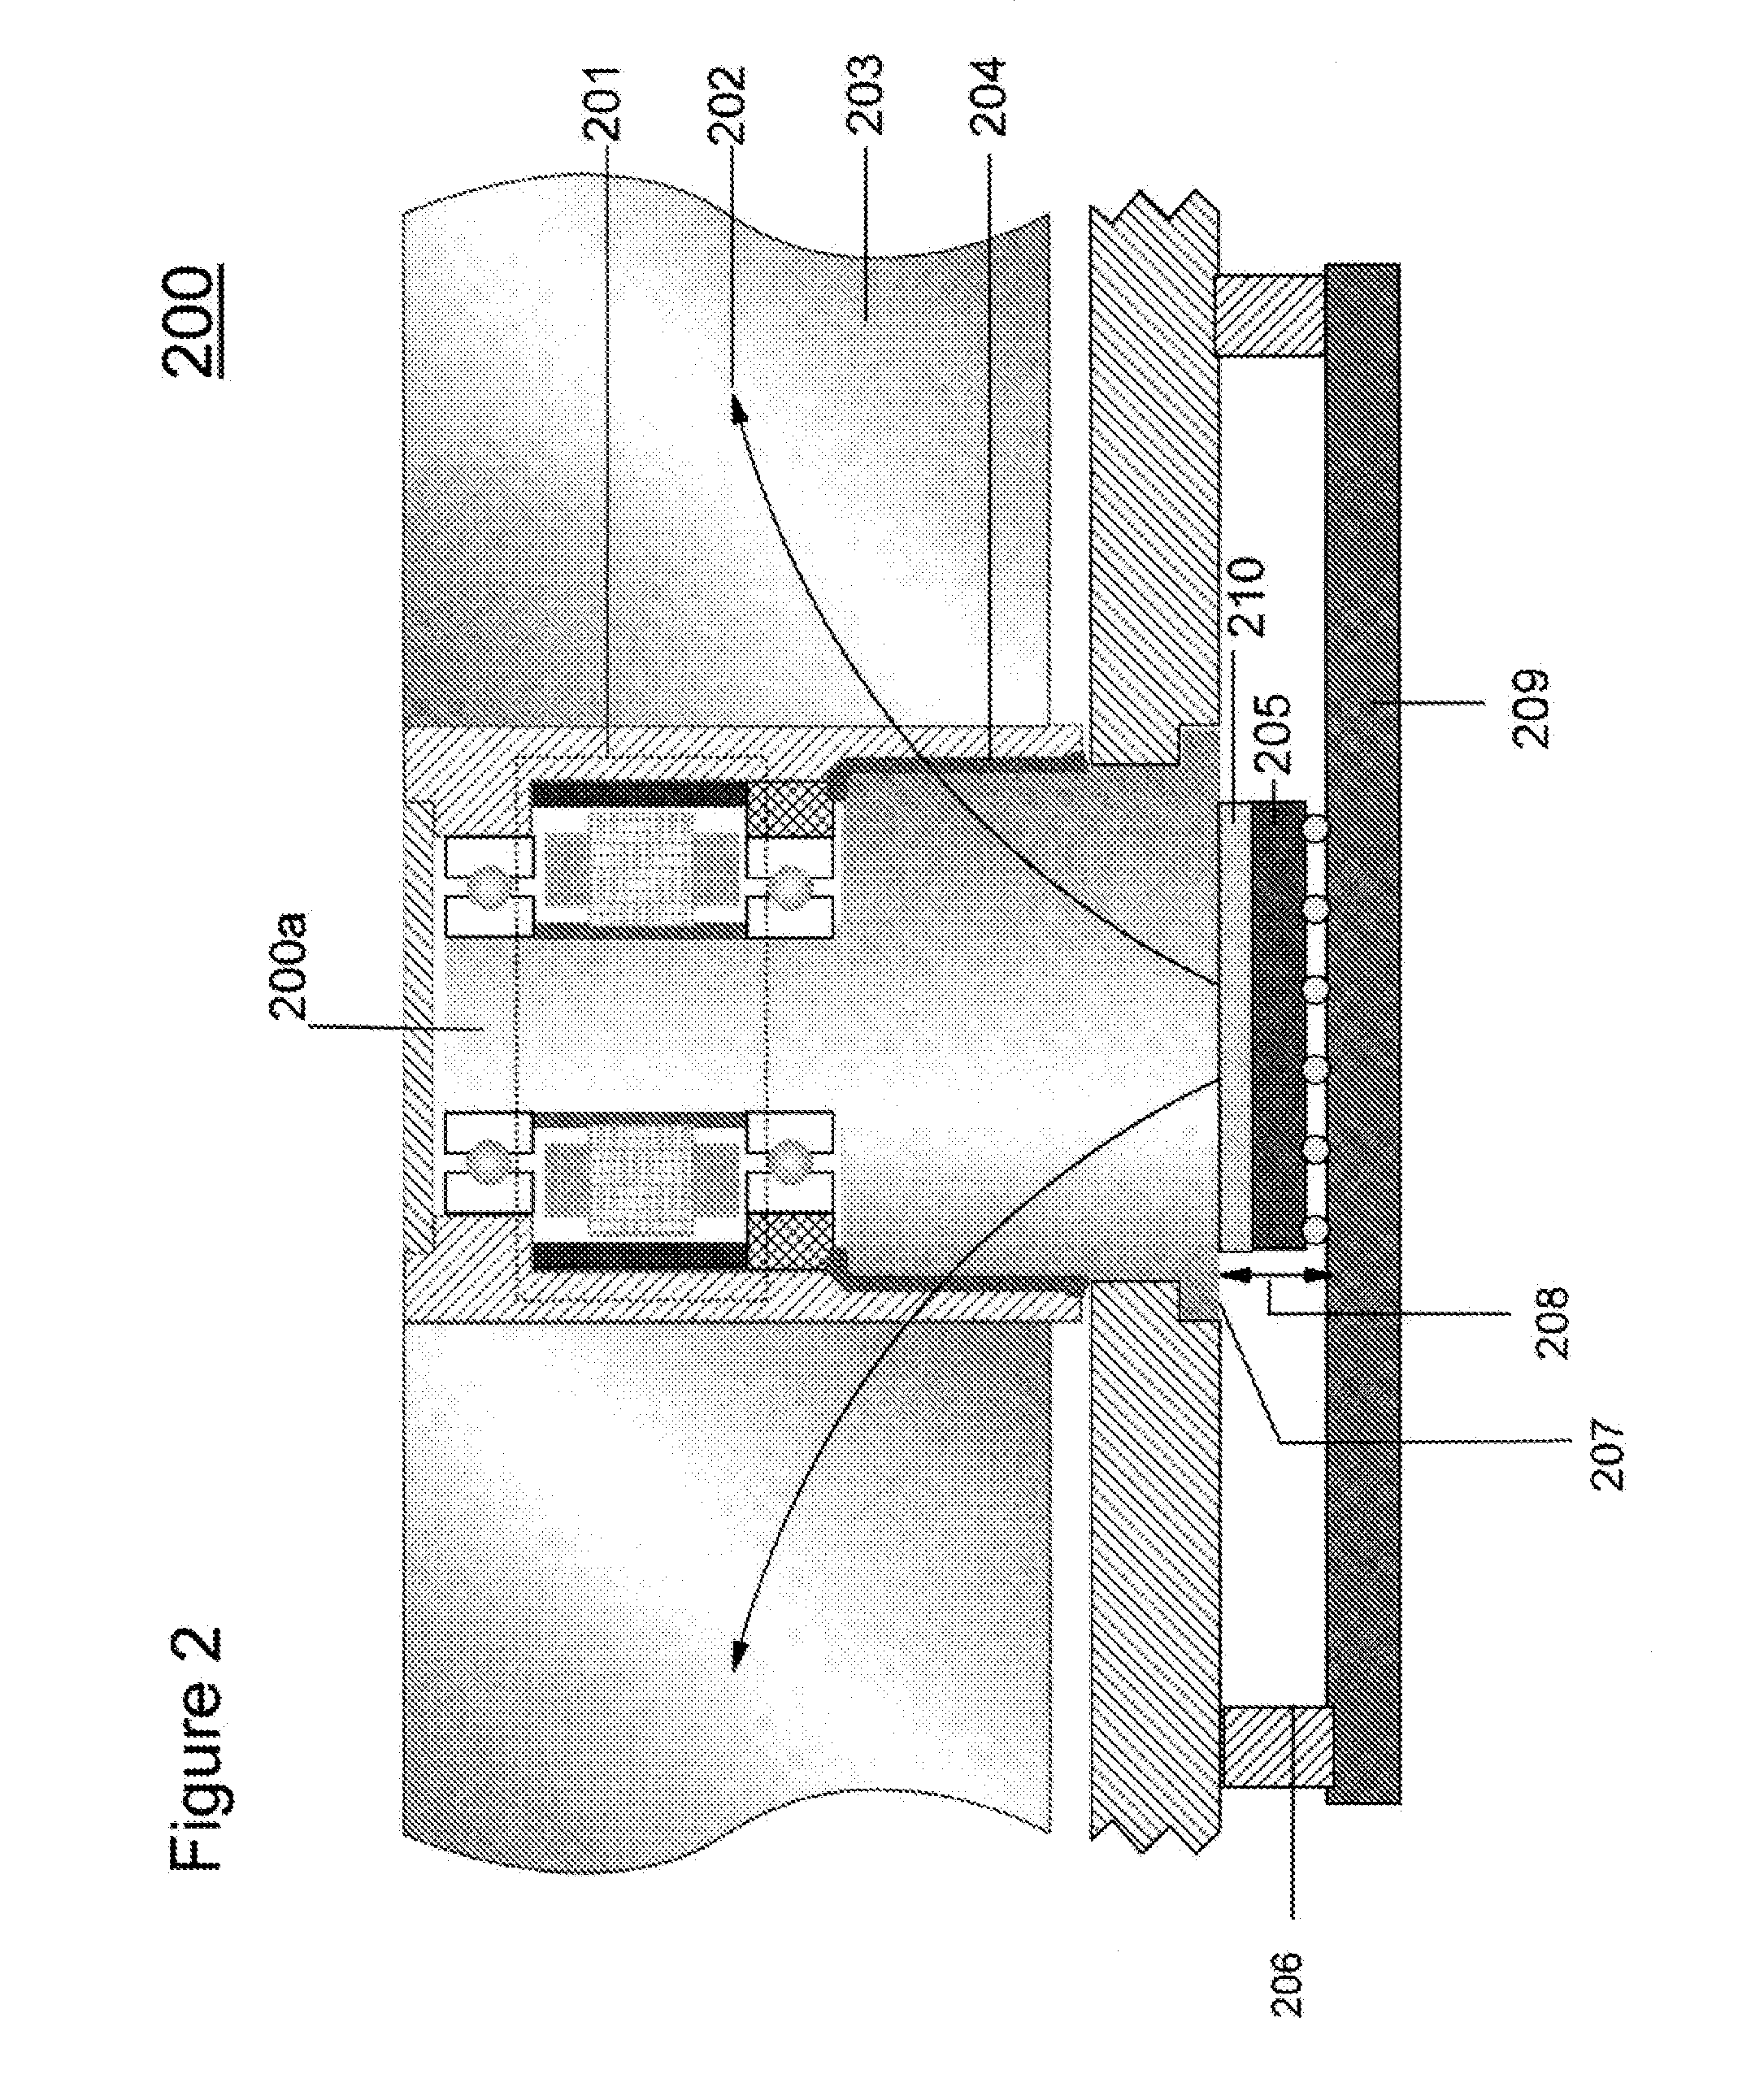 Heat transfer apparatus containing a compliant fluid film interface and method therefor